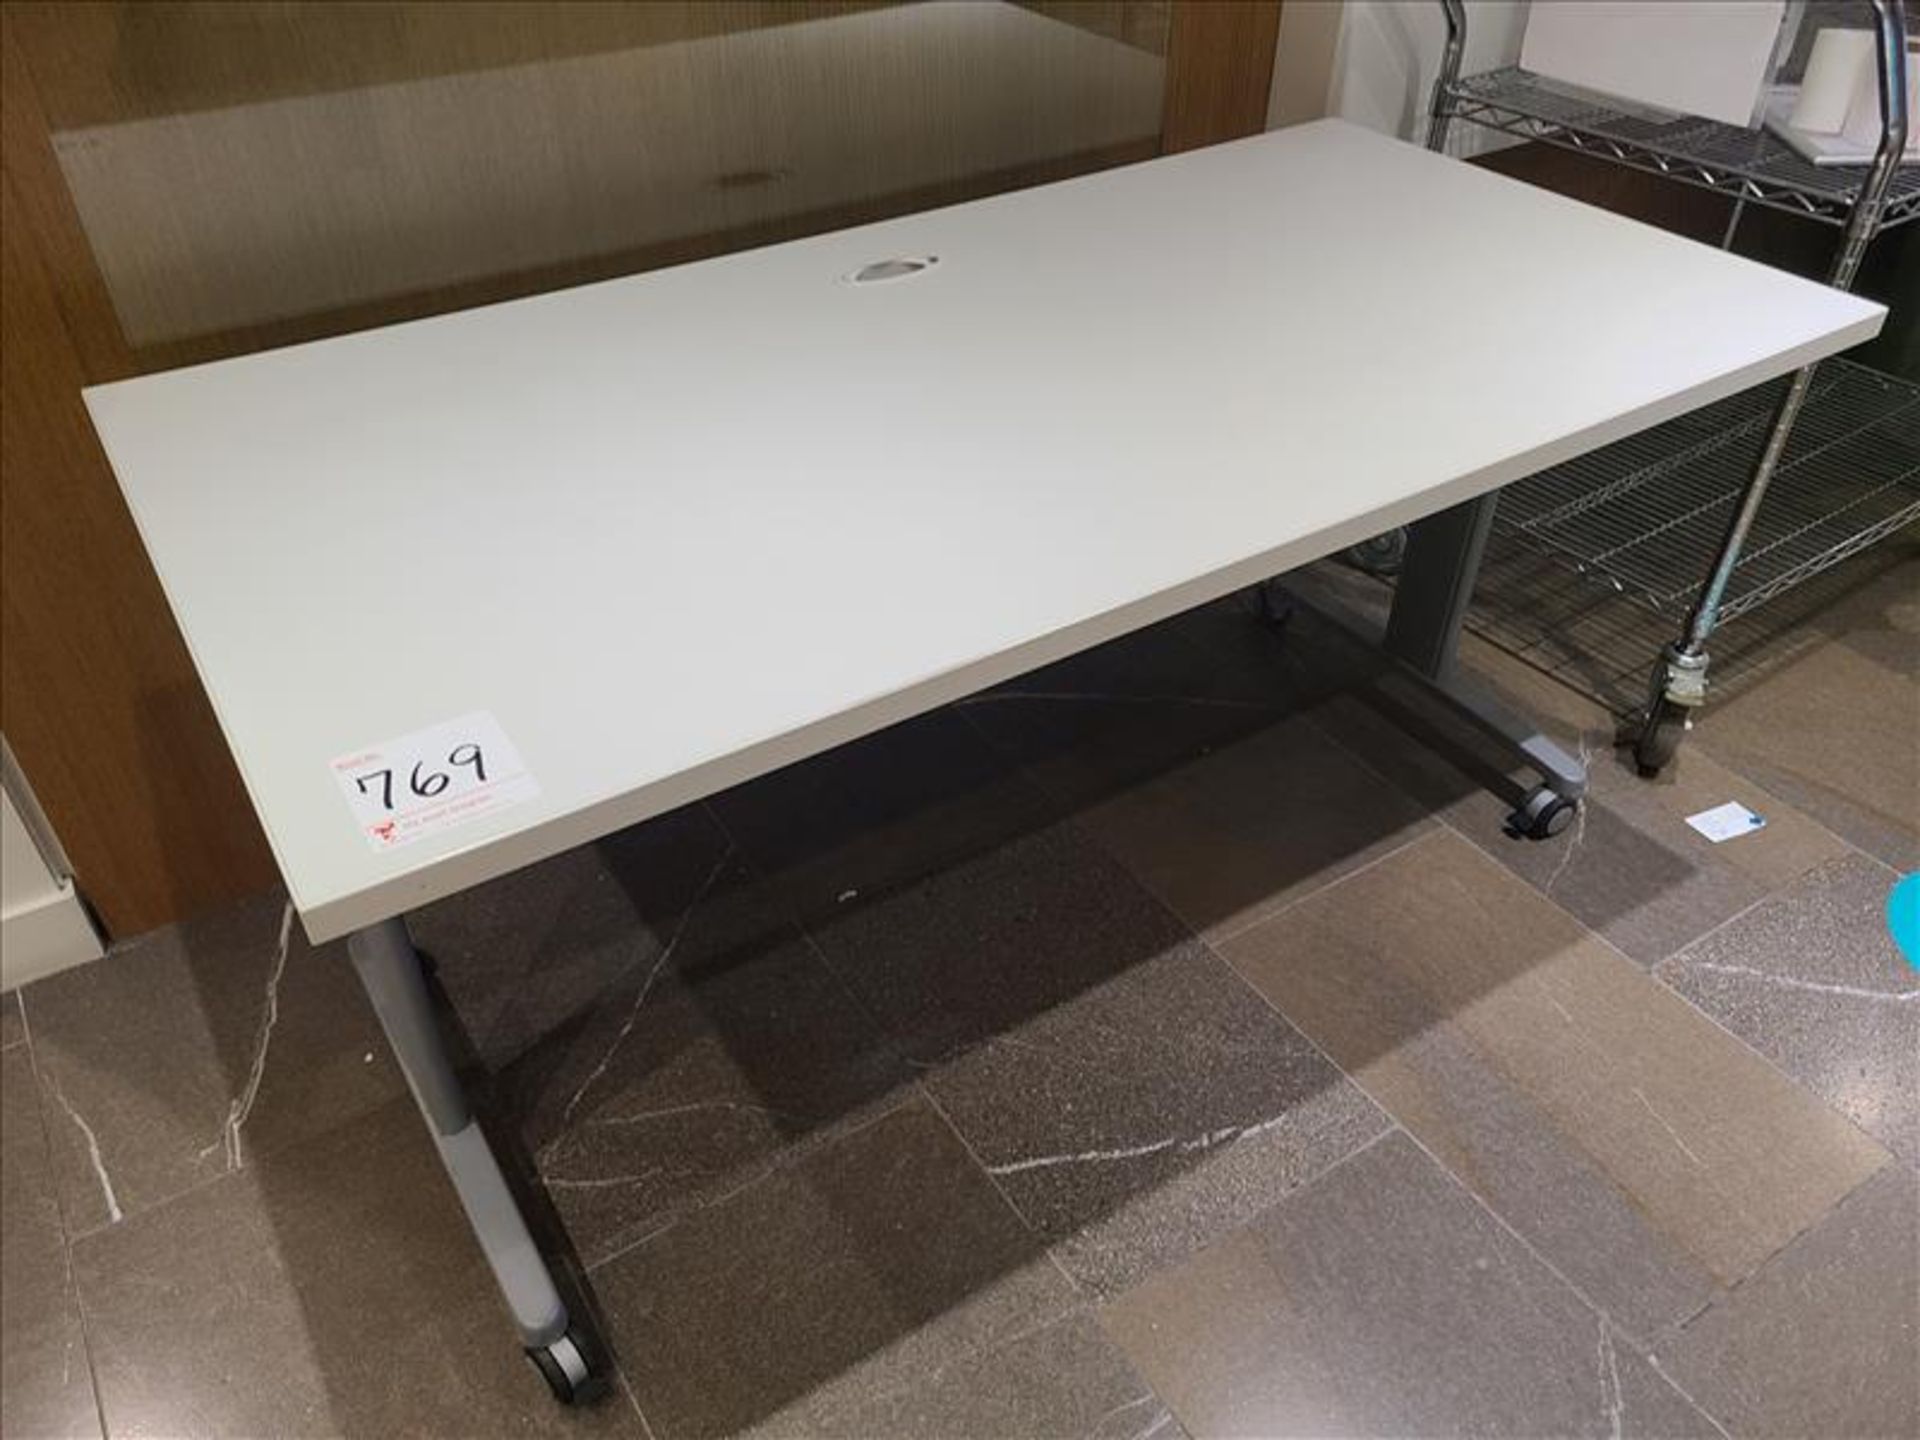 Task Table approx. 60 in. x 30 in., casters, w/tilting top (Qty 1) (Floor 4)